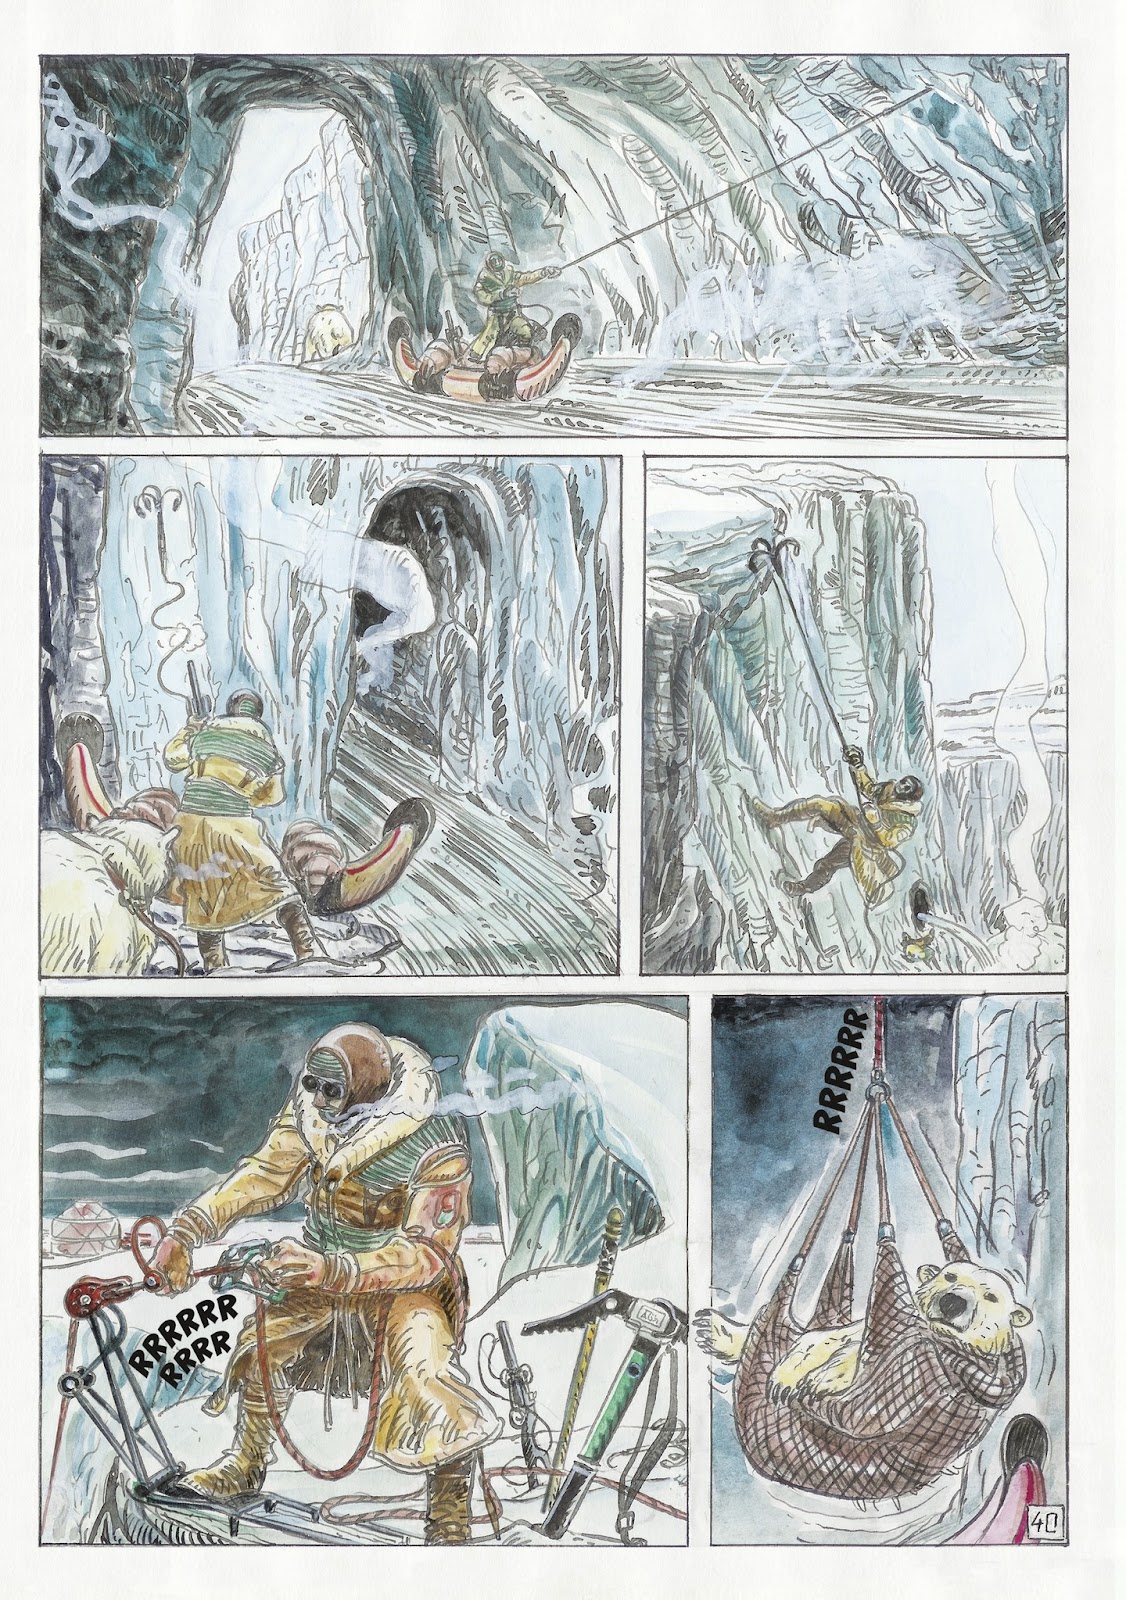 The Man With the Bear issue 1 - Page 42